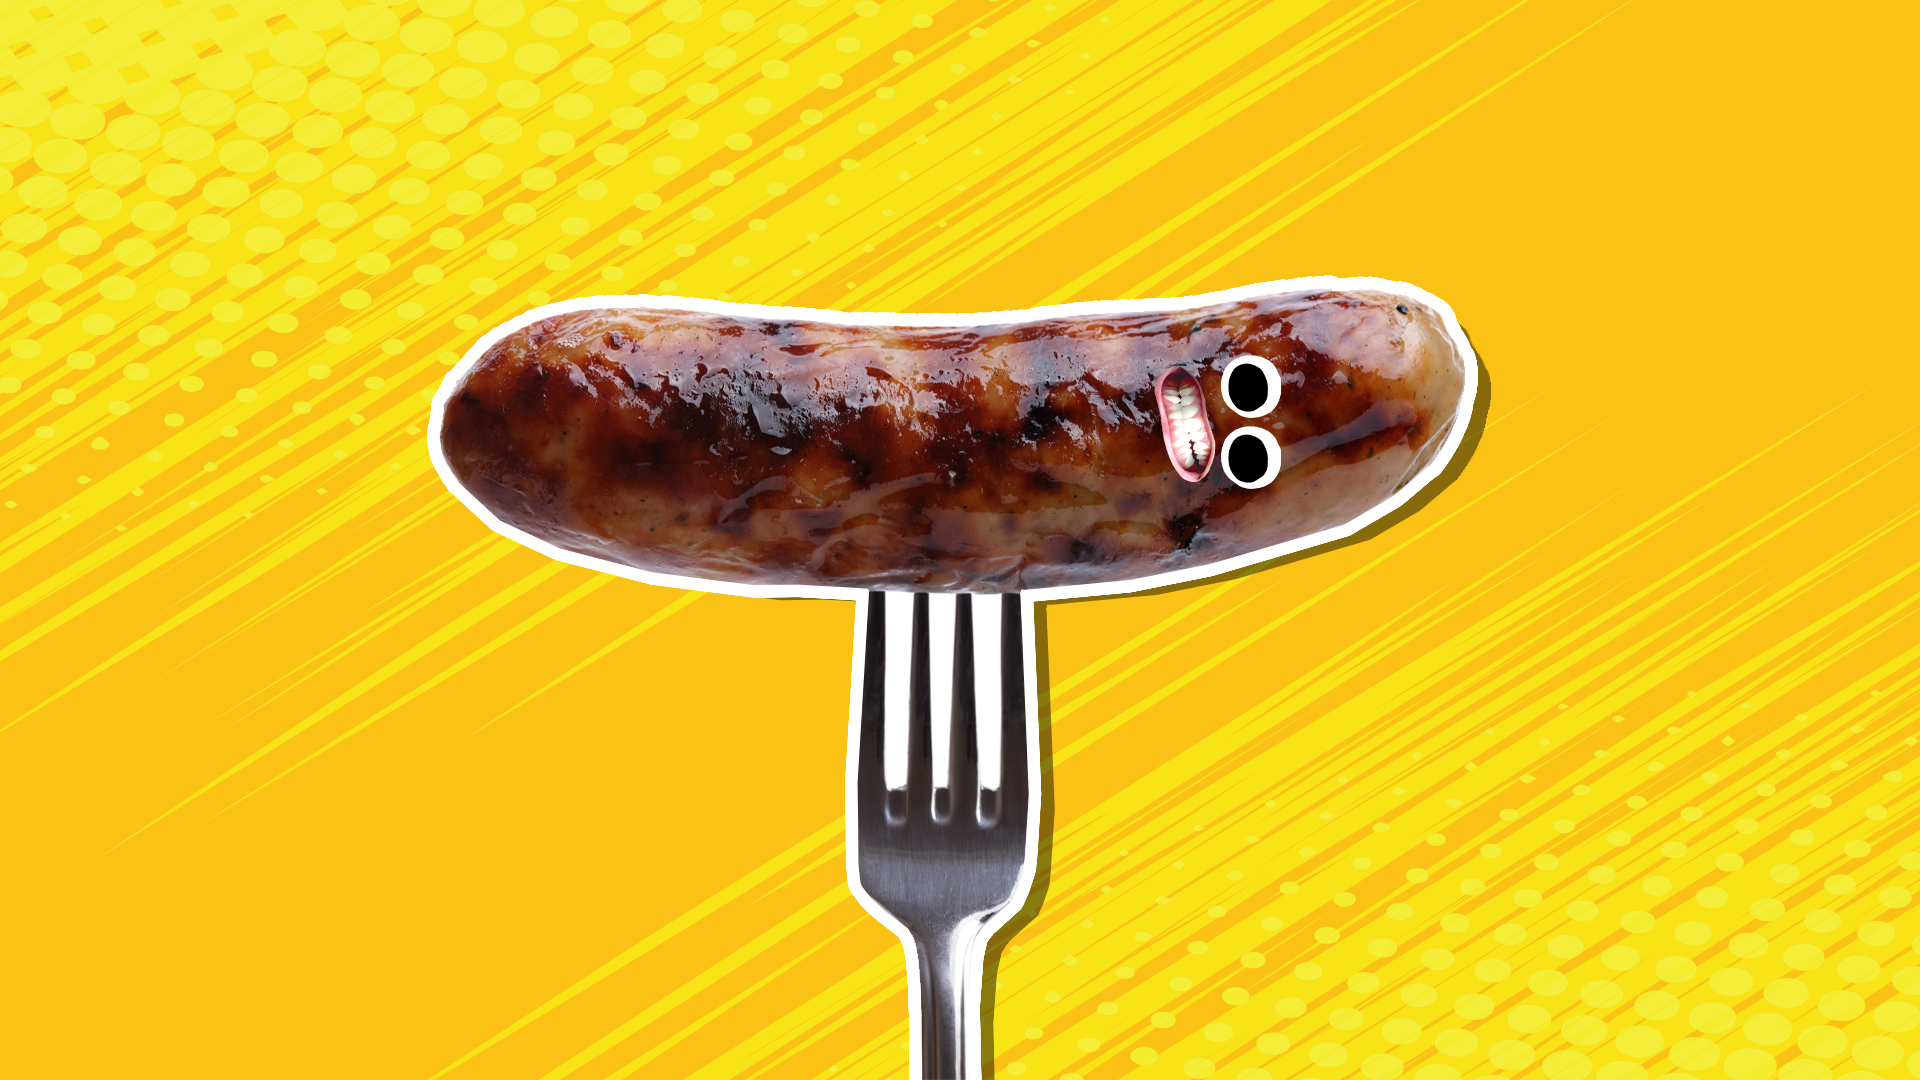 A sausage on a fork